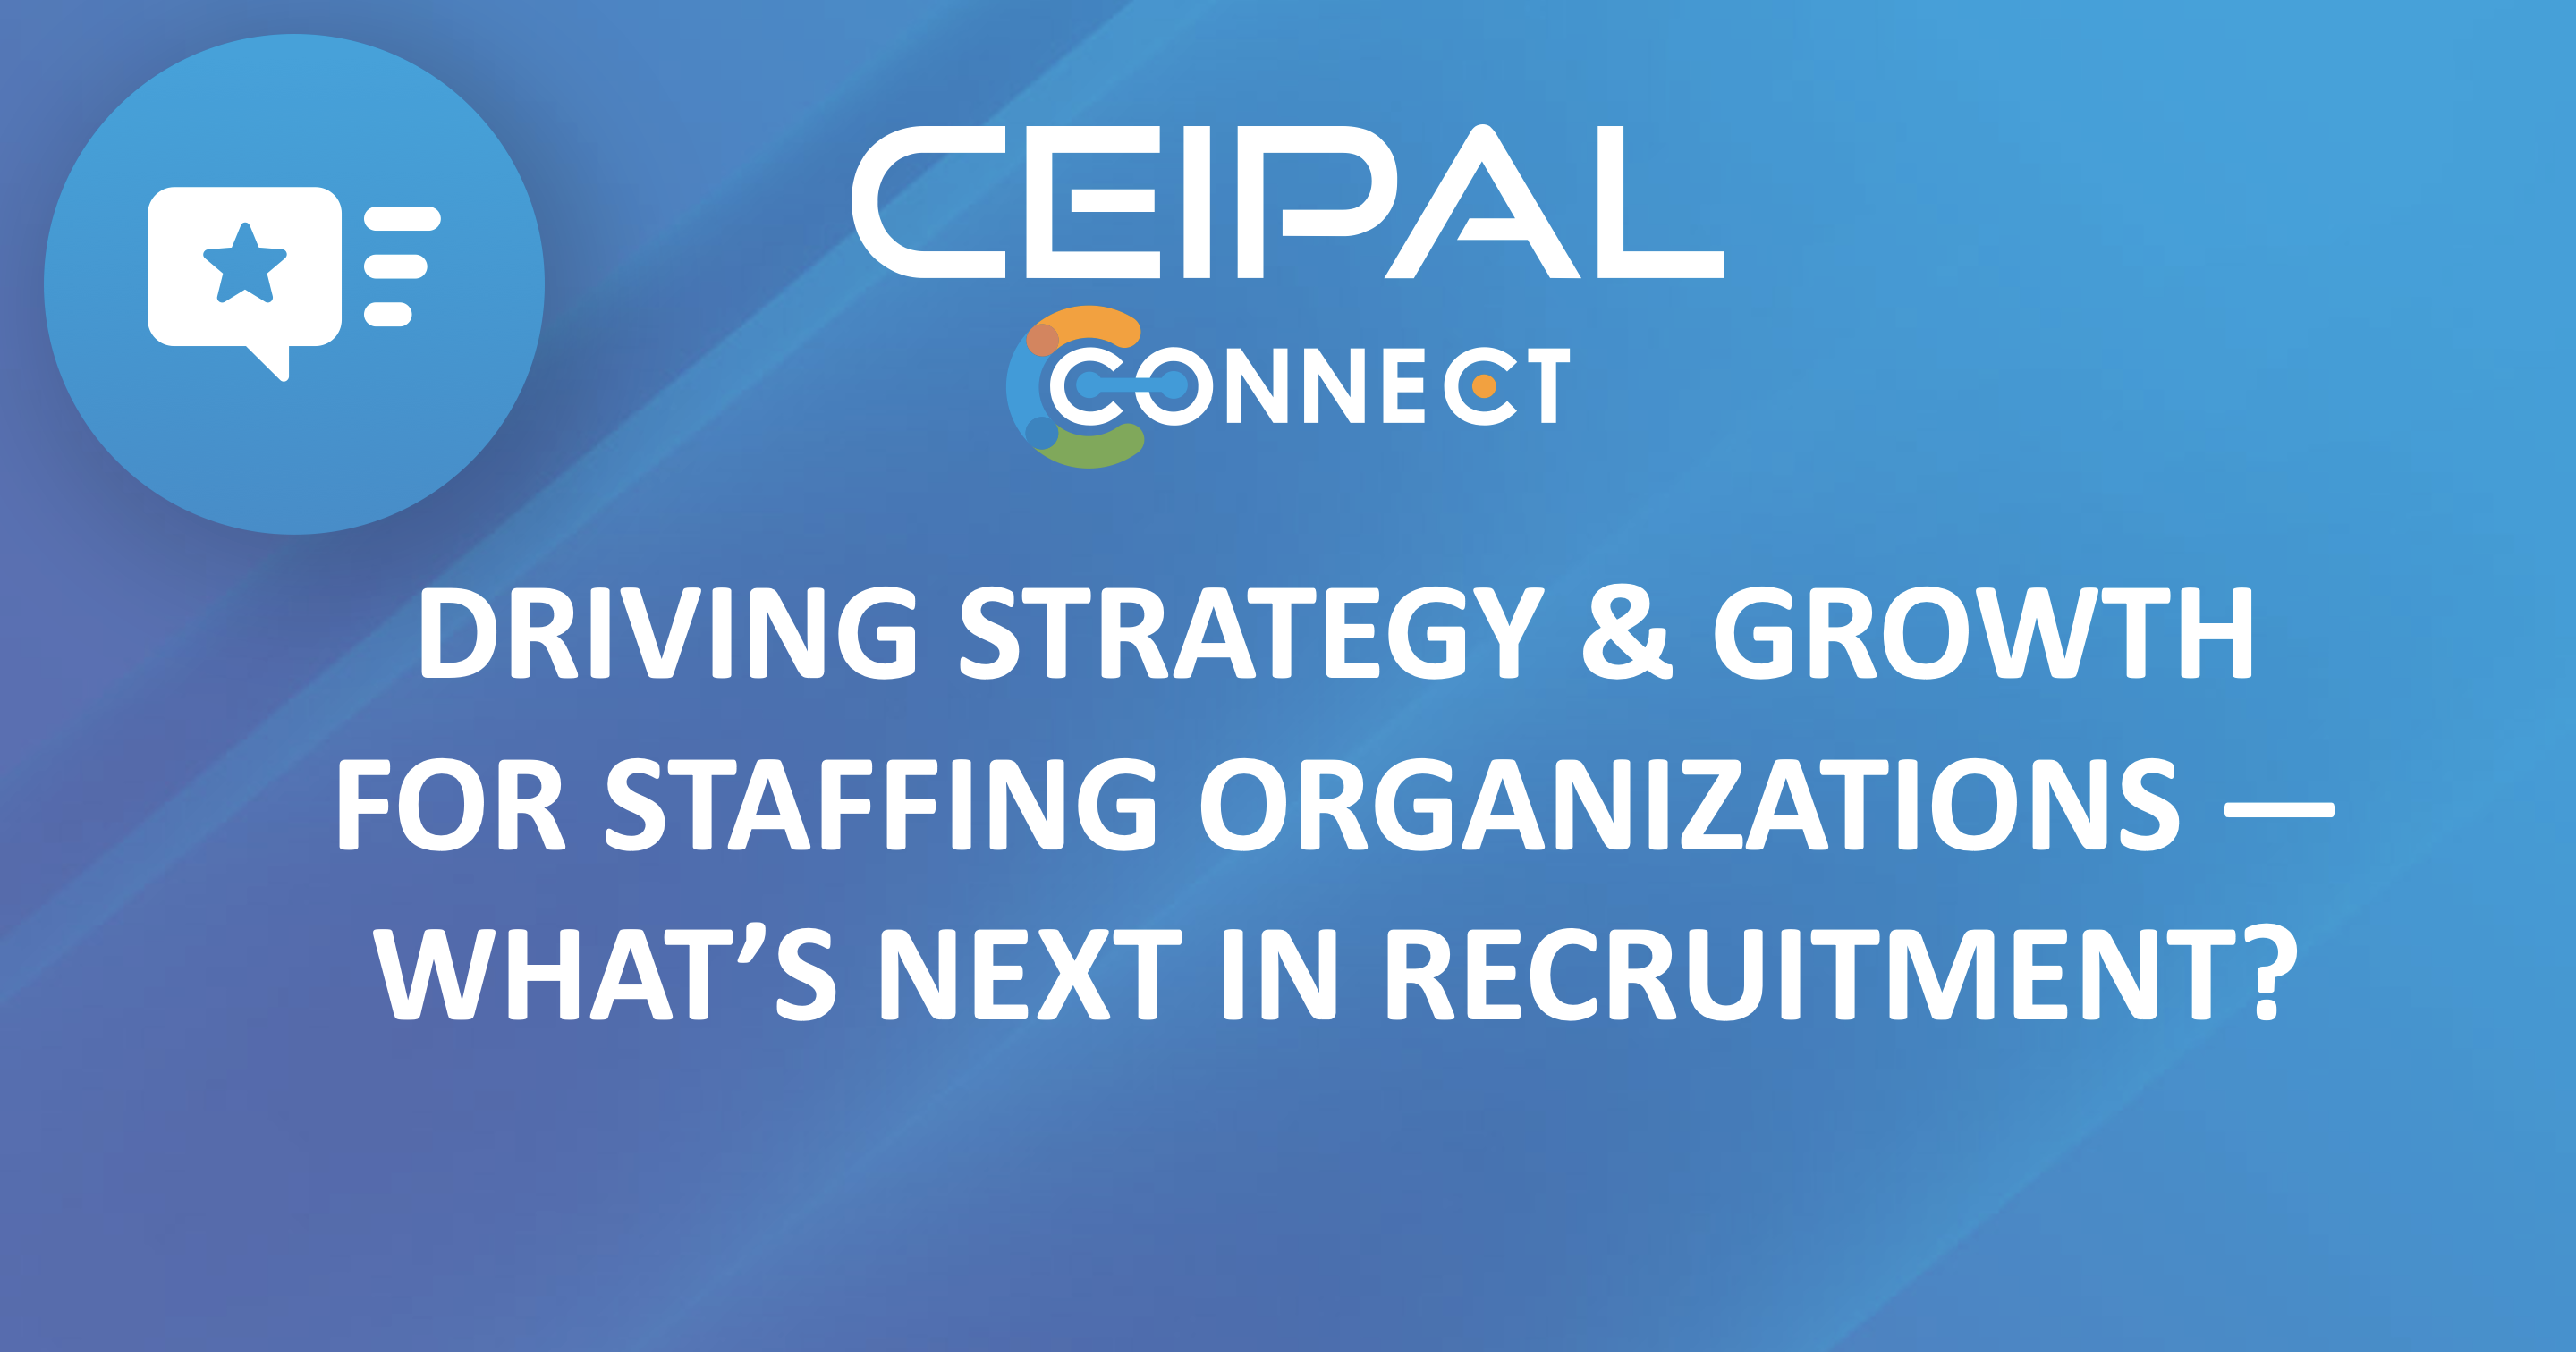 Driving Strategy & Growth For Staffing Organizations—What’s Next in Recruitment?